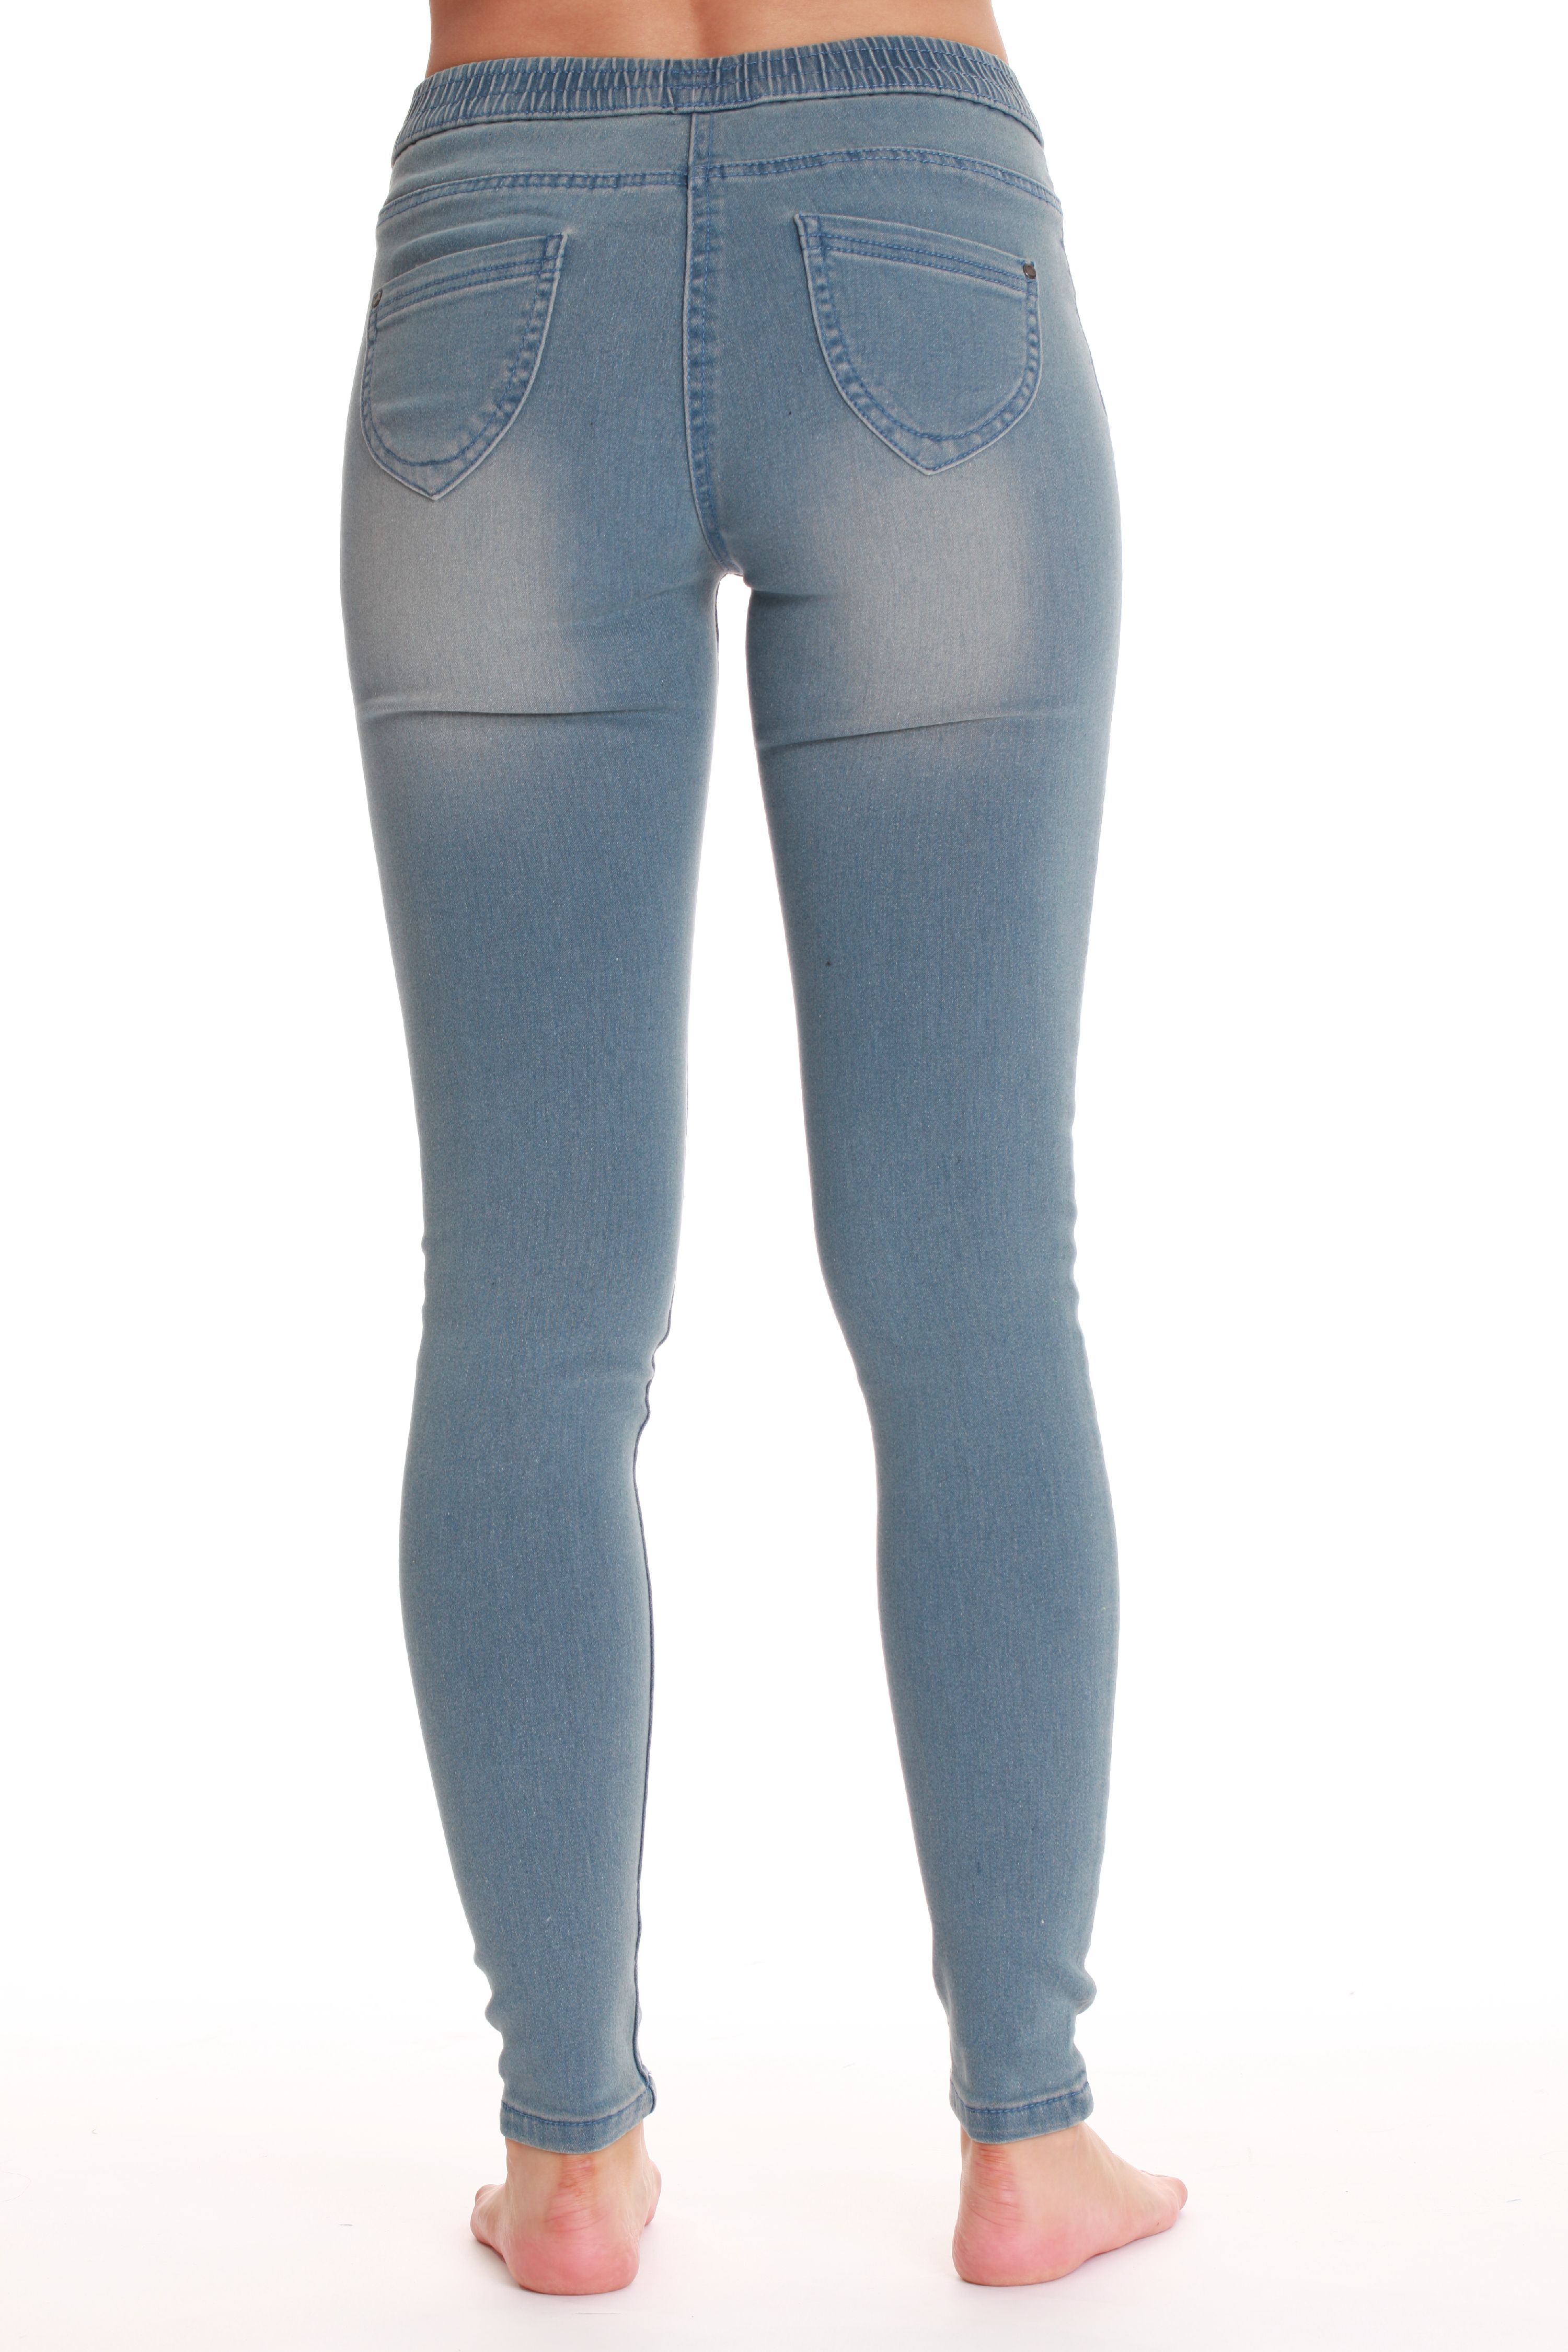 Just Love Women's Denim Jeggings with Pockets - Comfortable Stretch Jeans Leggings (Light Blue Denim, Small) - image 2 of 2